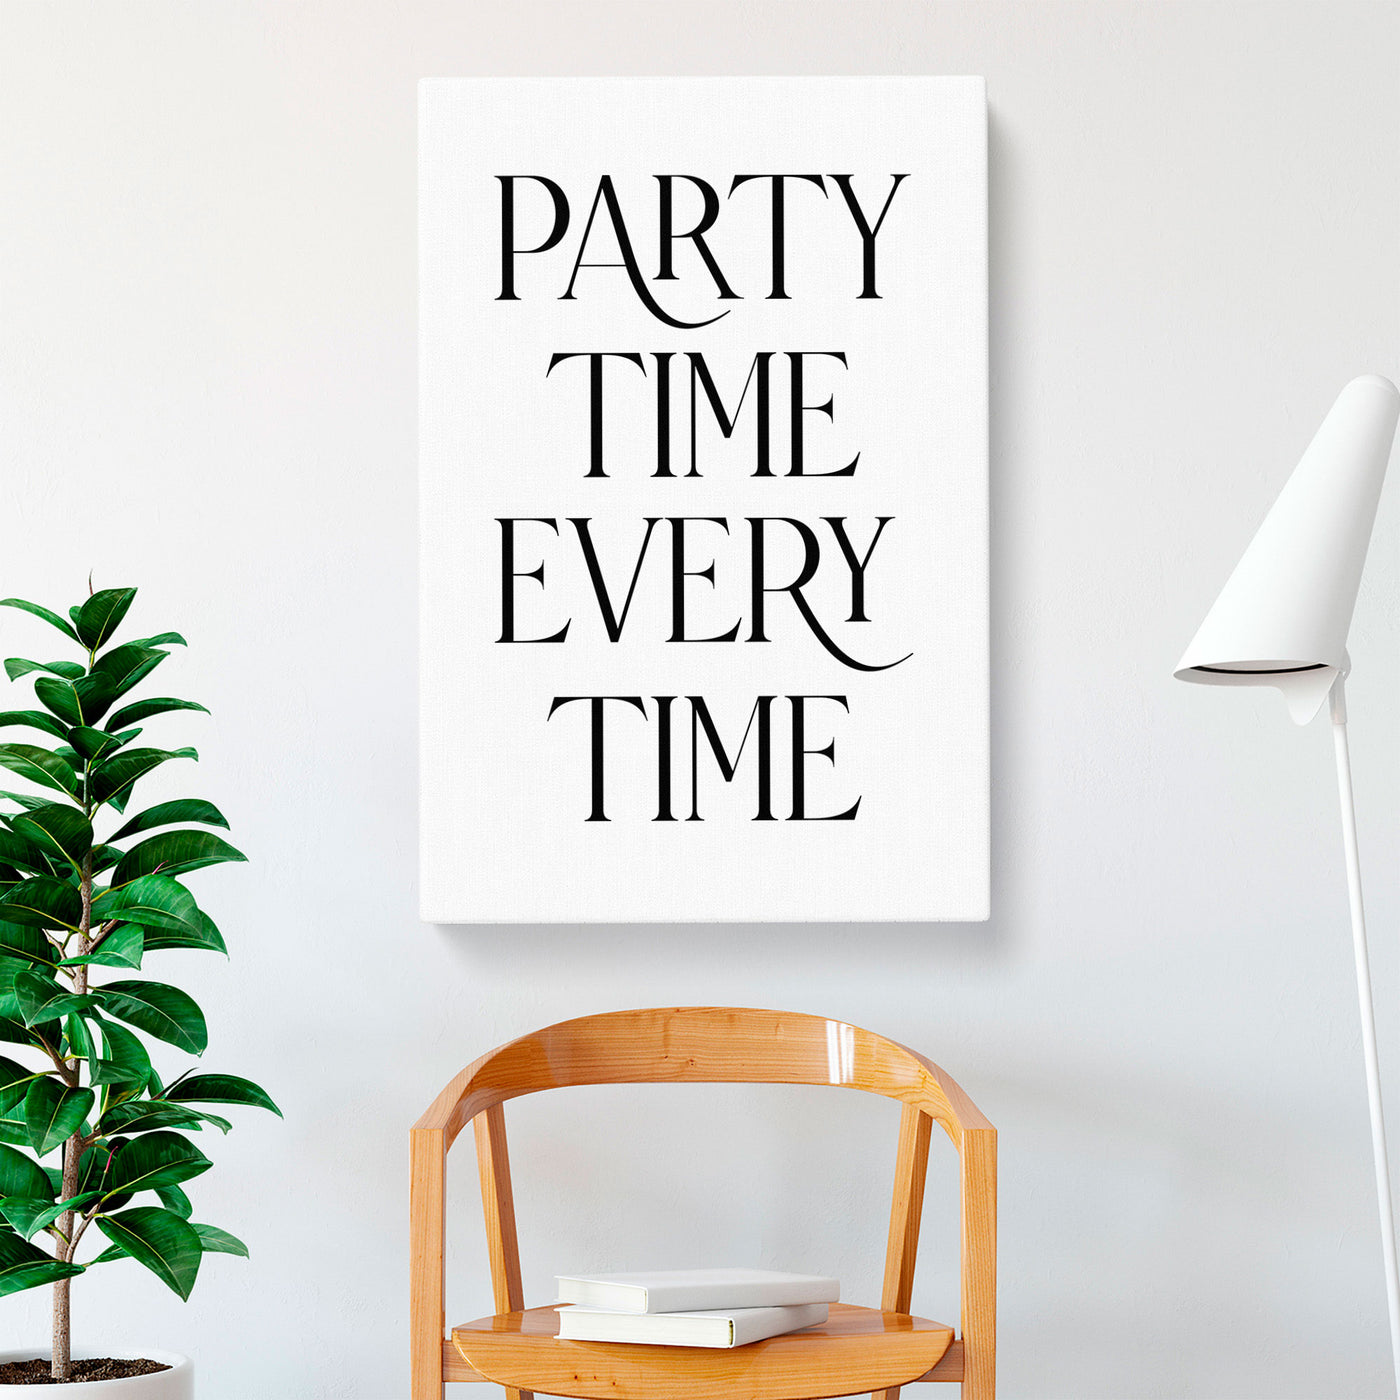 Party Time Every Time